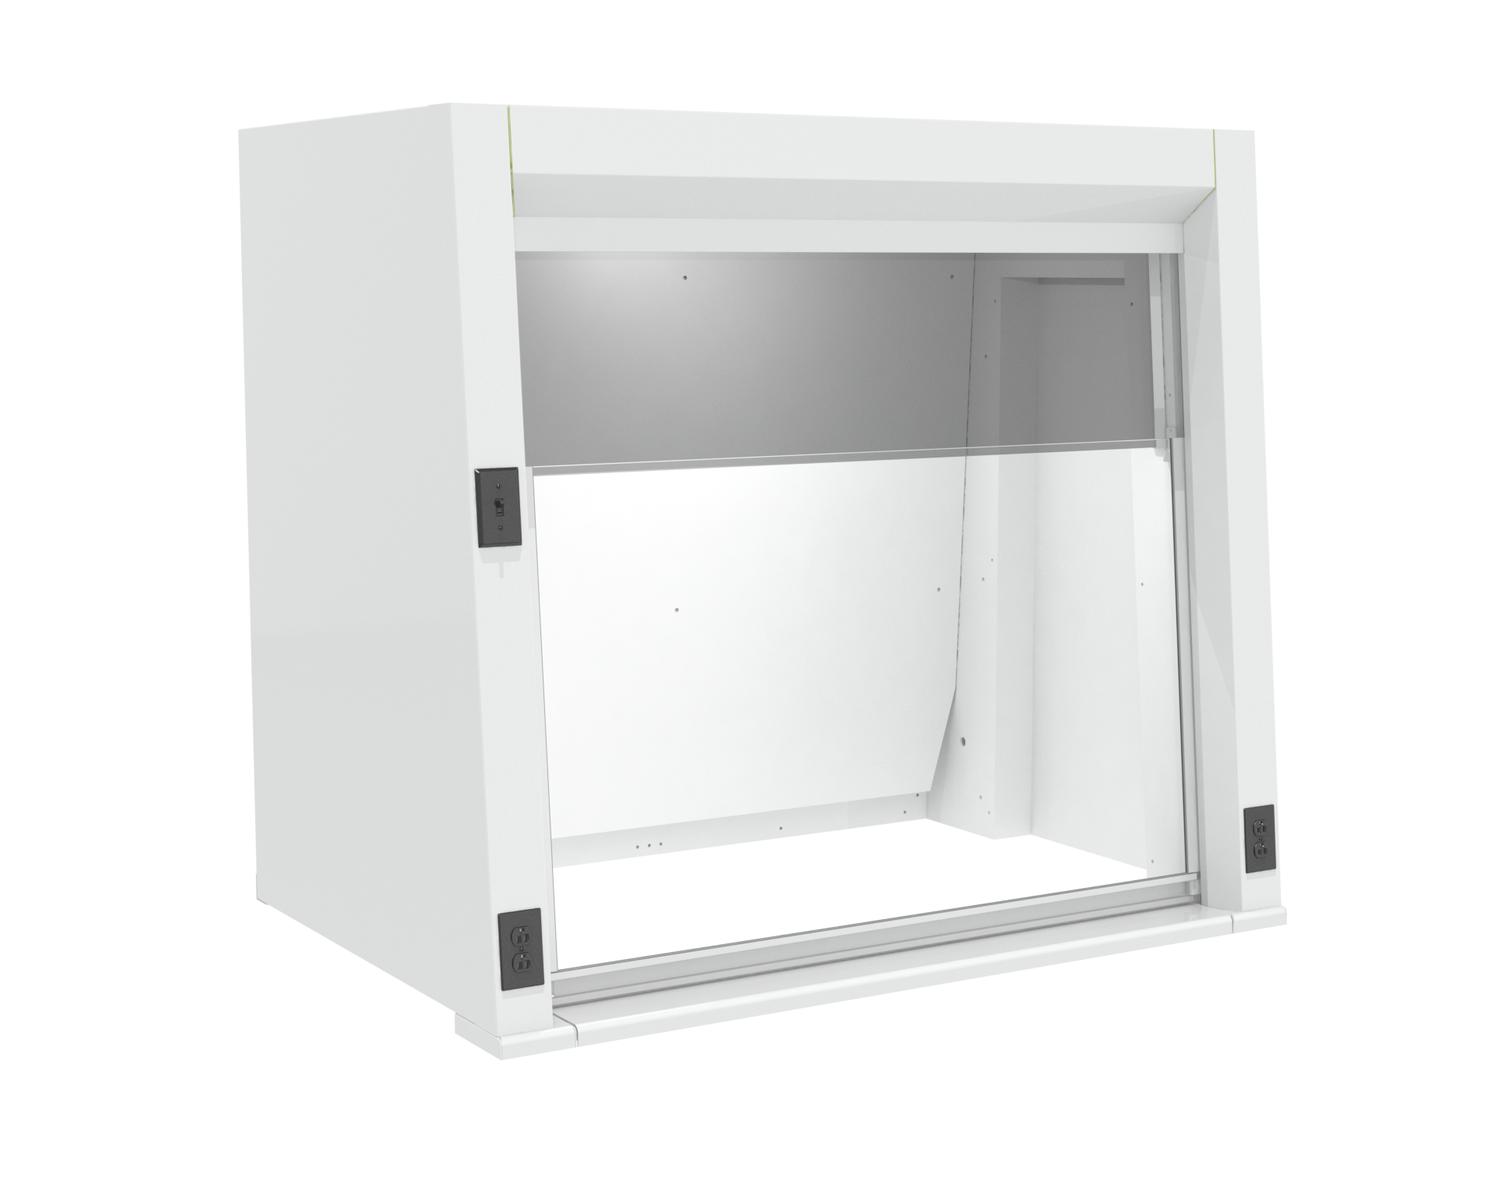 Safeguard Series Fume Hoods - New England Lab in Partnership with Mott Manufacturing